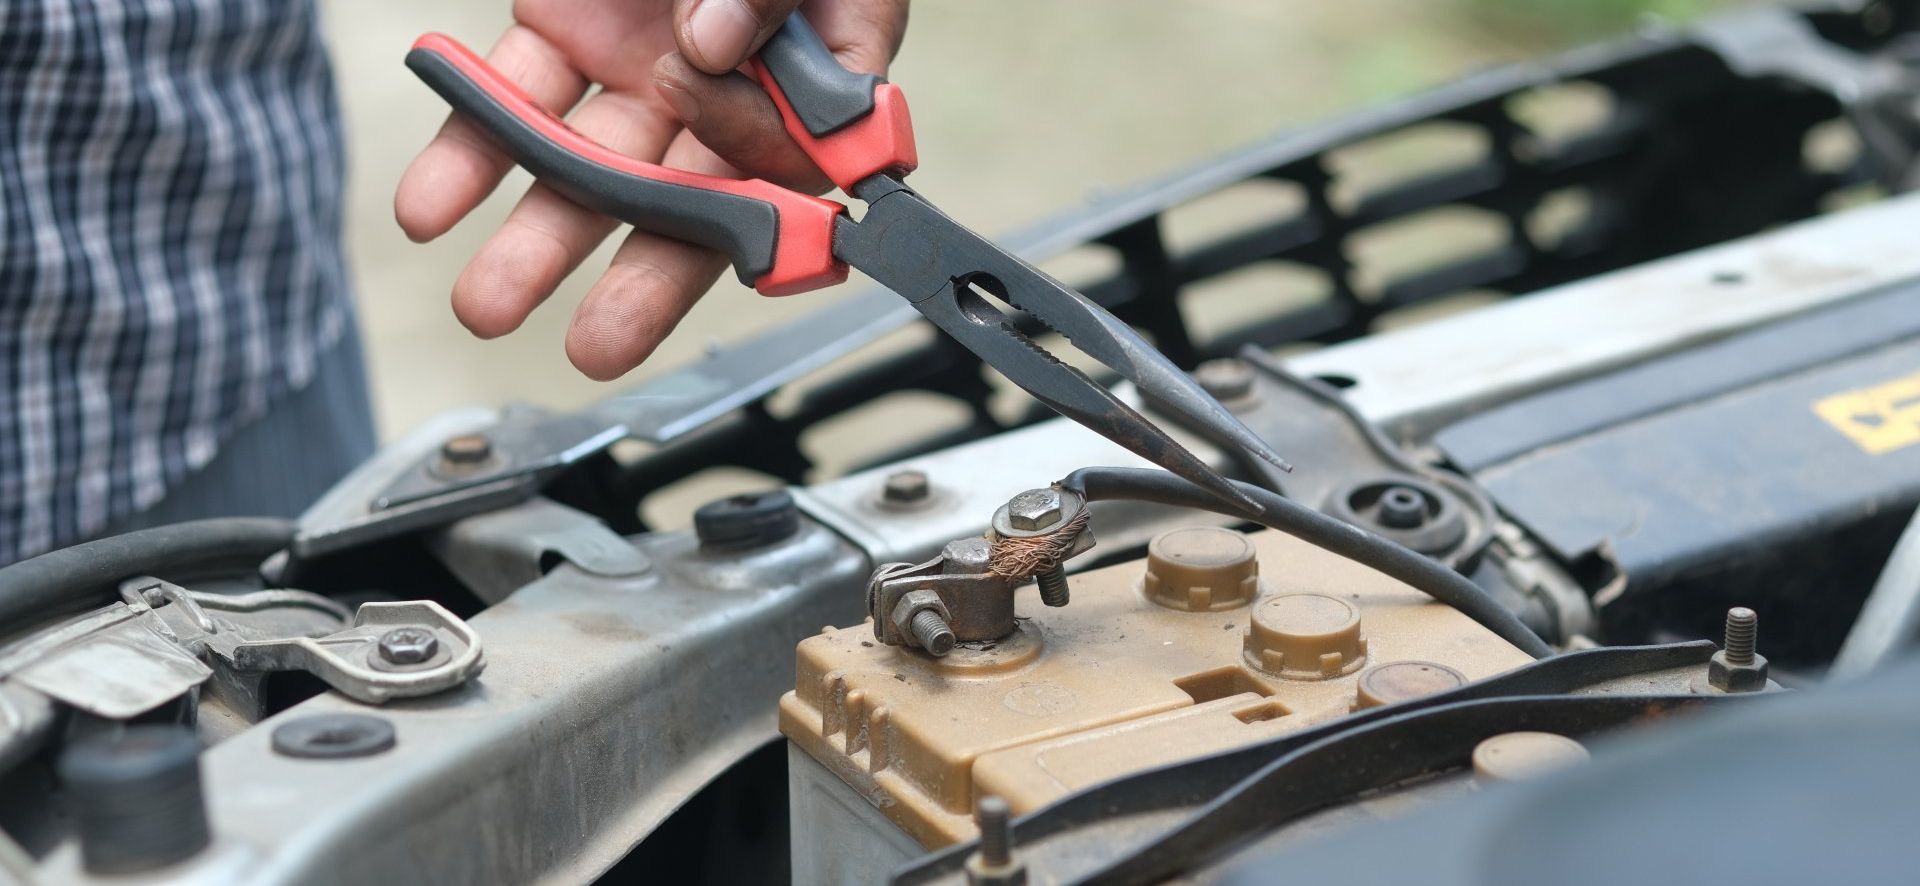 man uses tool to fix car battery